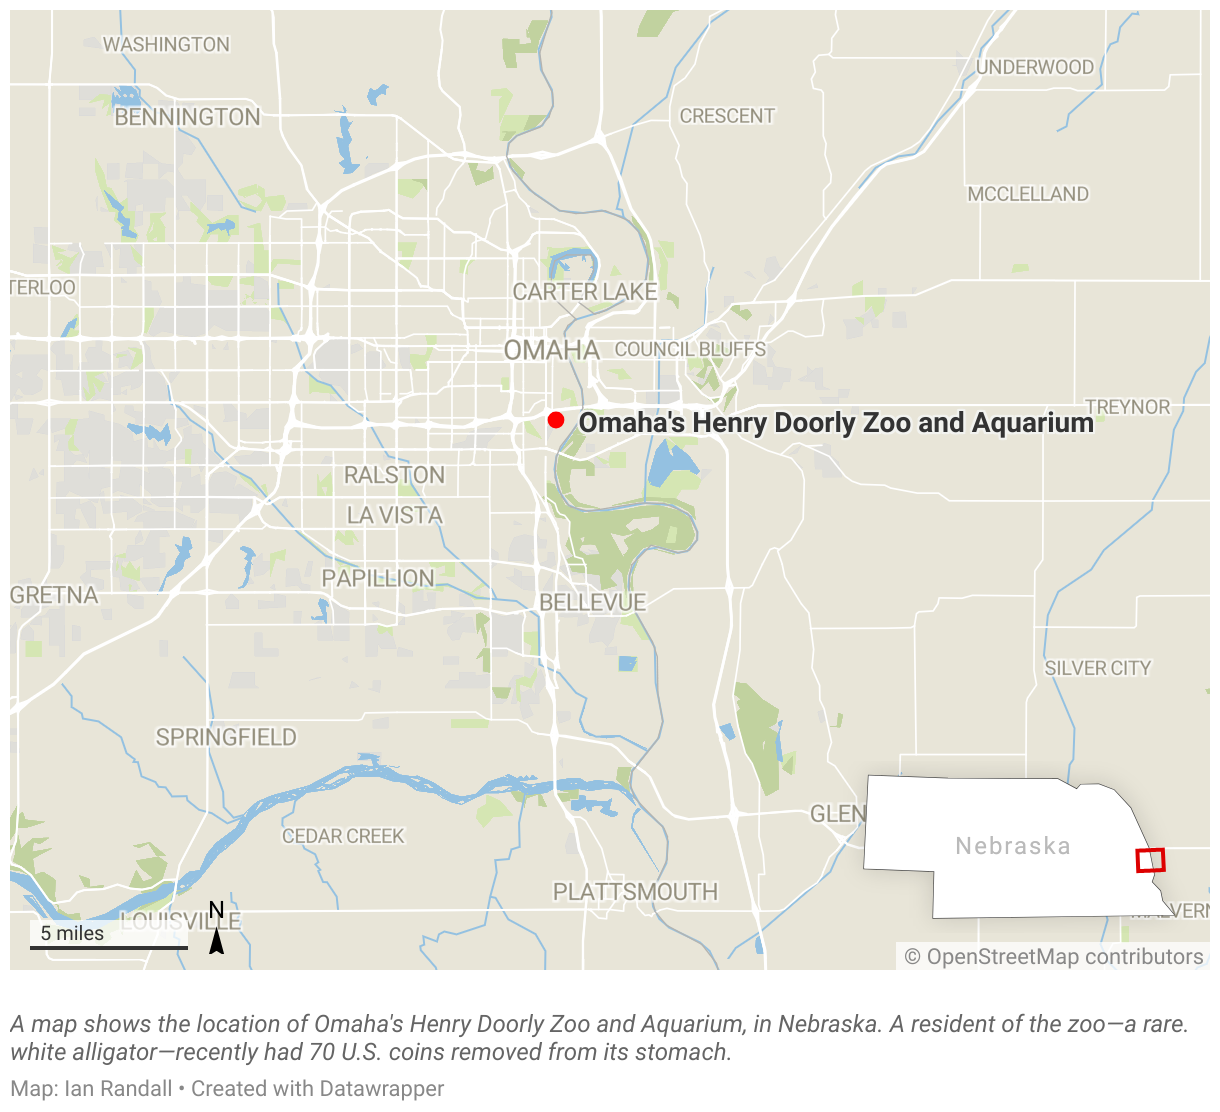 A map shows the location of Omaha's Henry Doorly Zoo and Aquarium, in Nebraska.